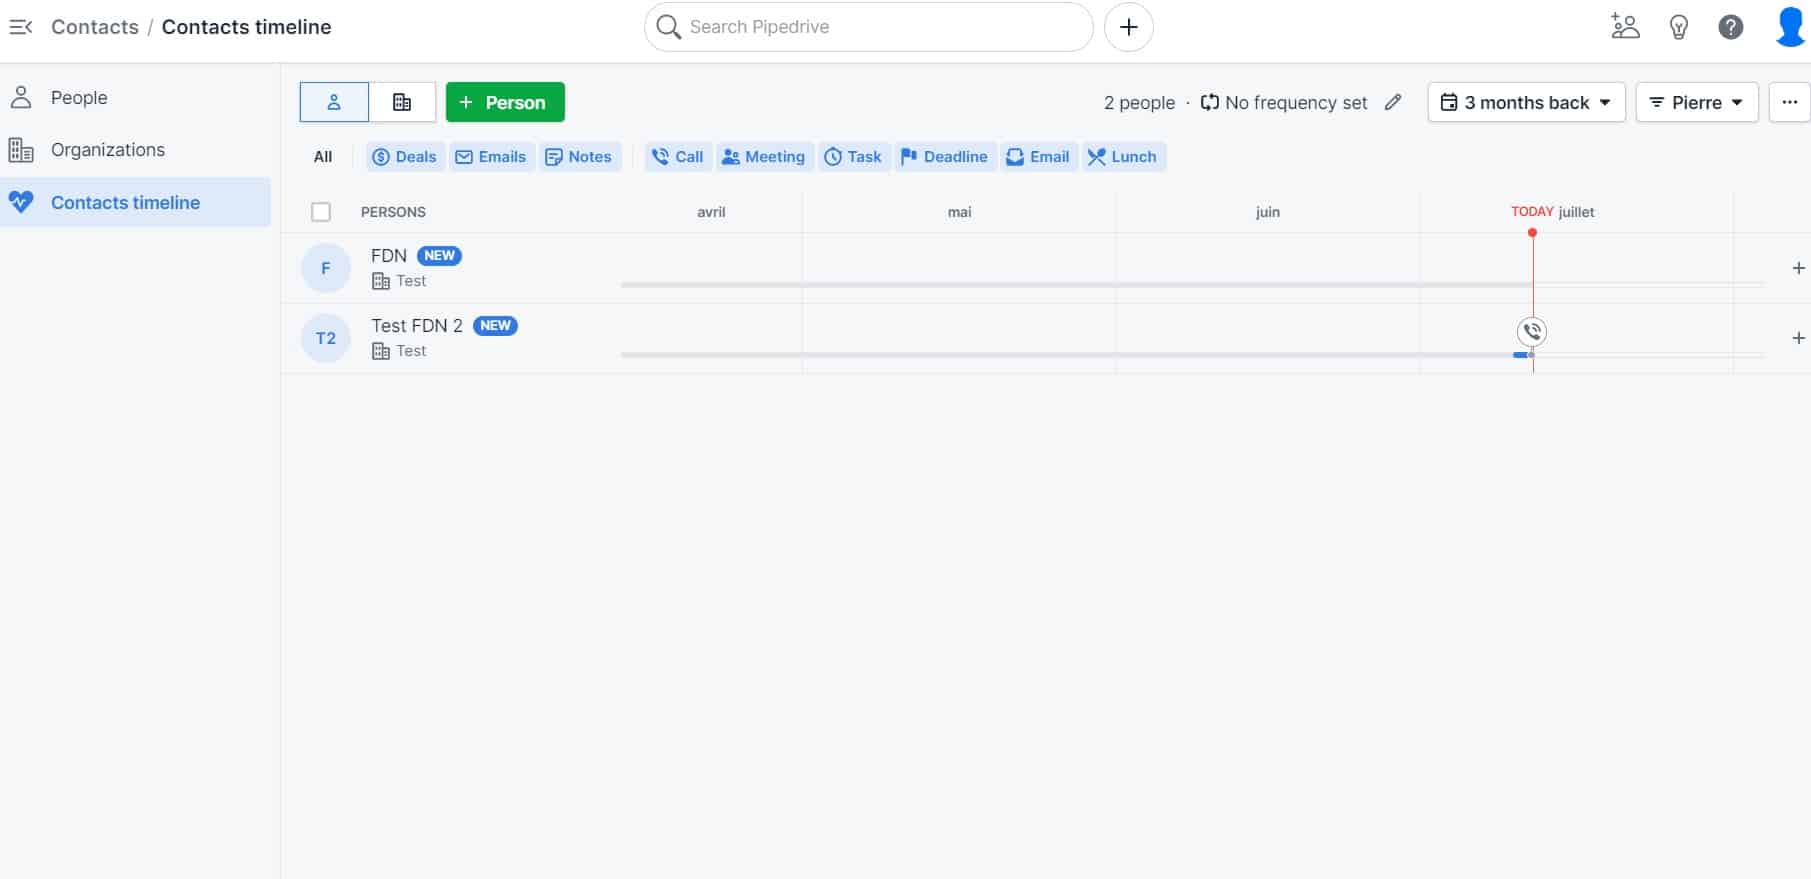 gestion des contacts pipedrive